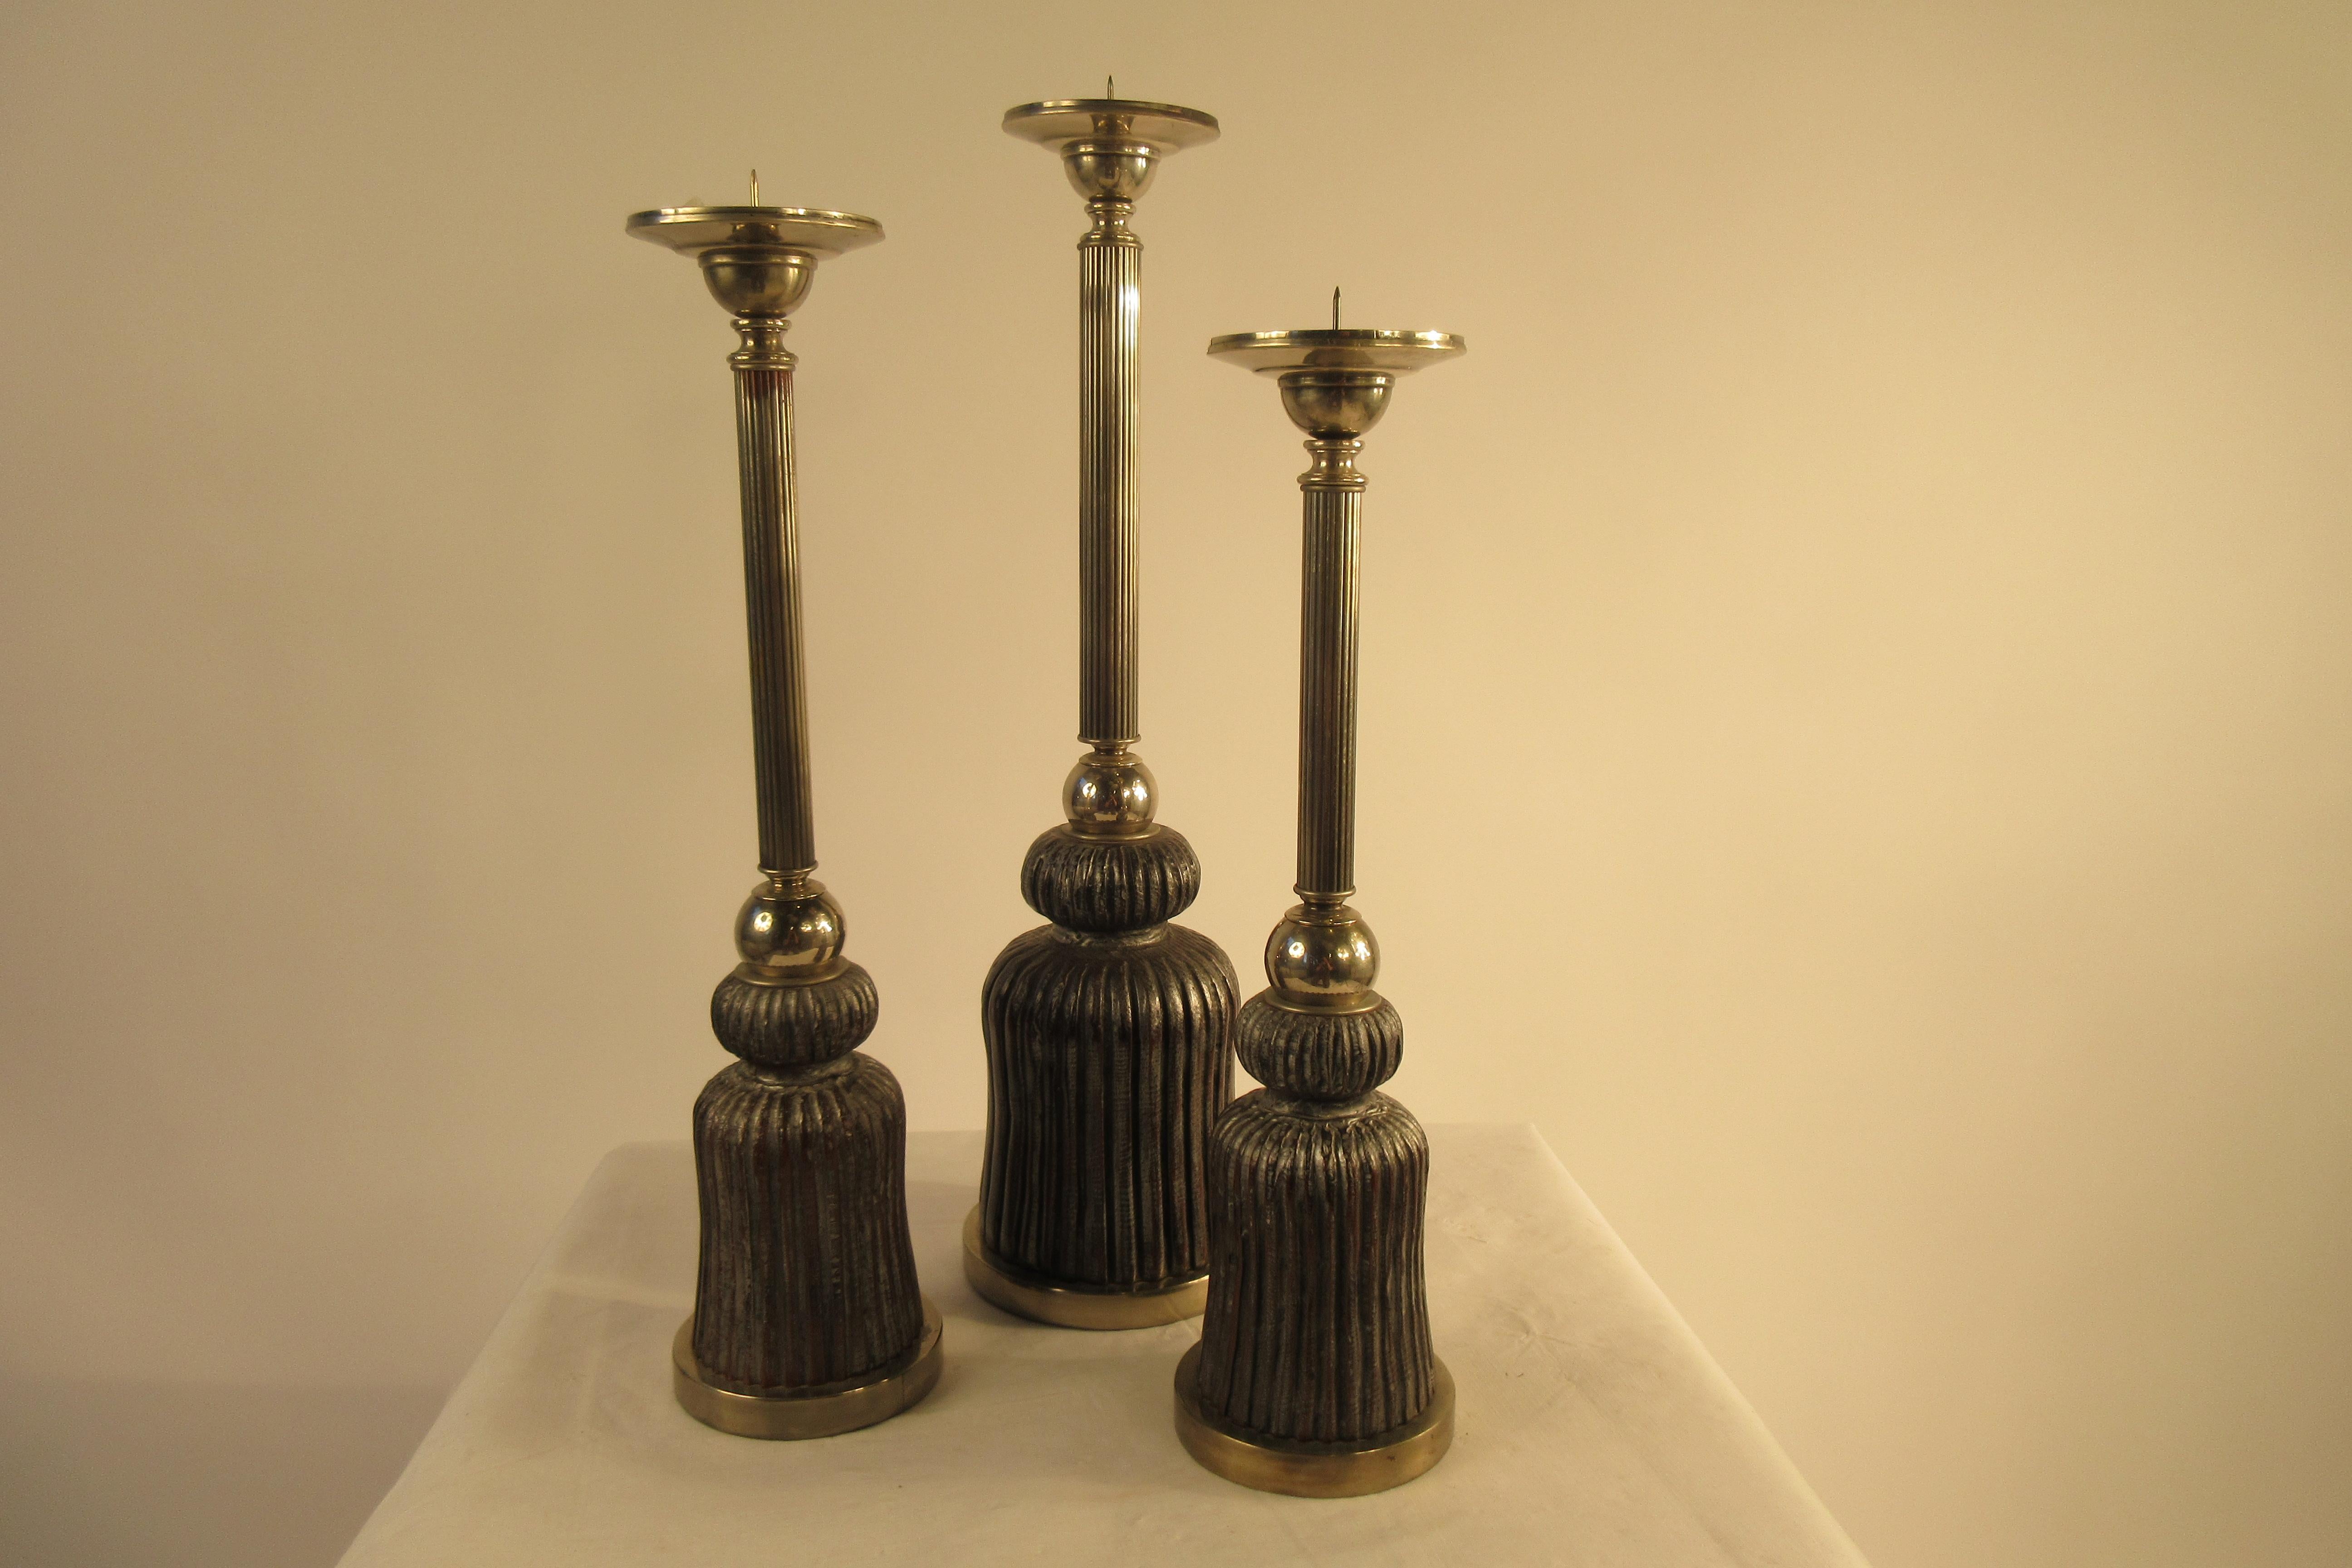 3 1980s silver plate and wood tassel candlesticks. Each a different height.